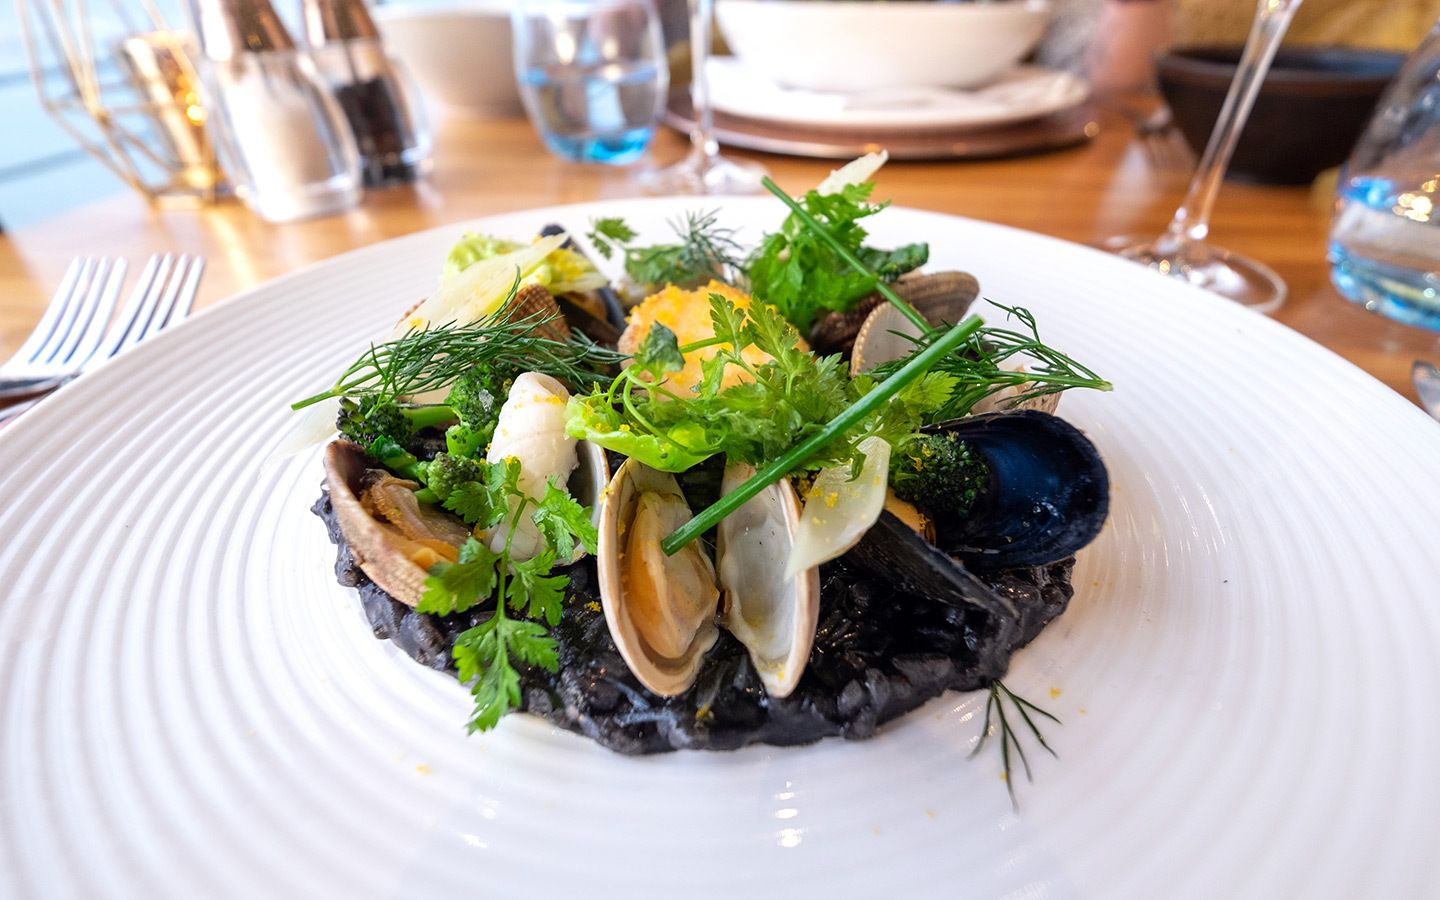 Squid ink risotto at the Seafood Ristorante